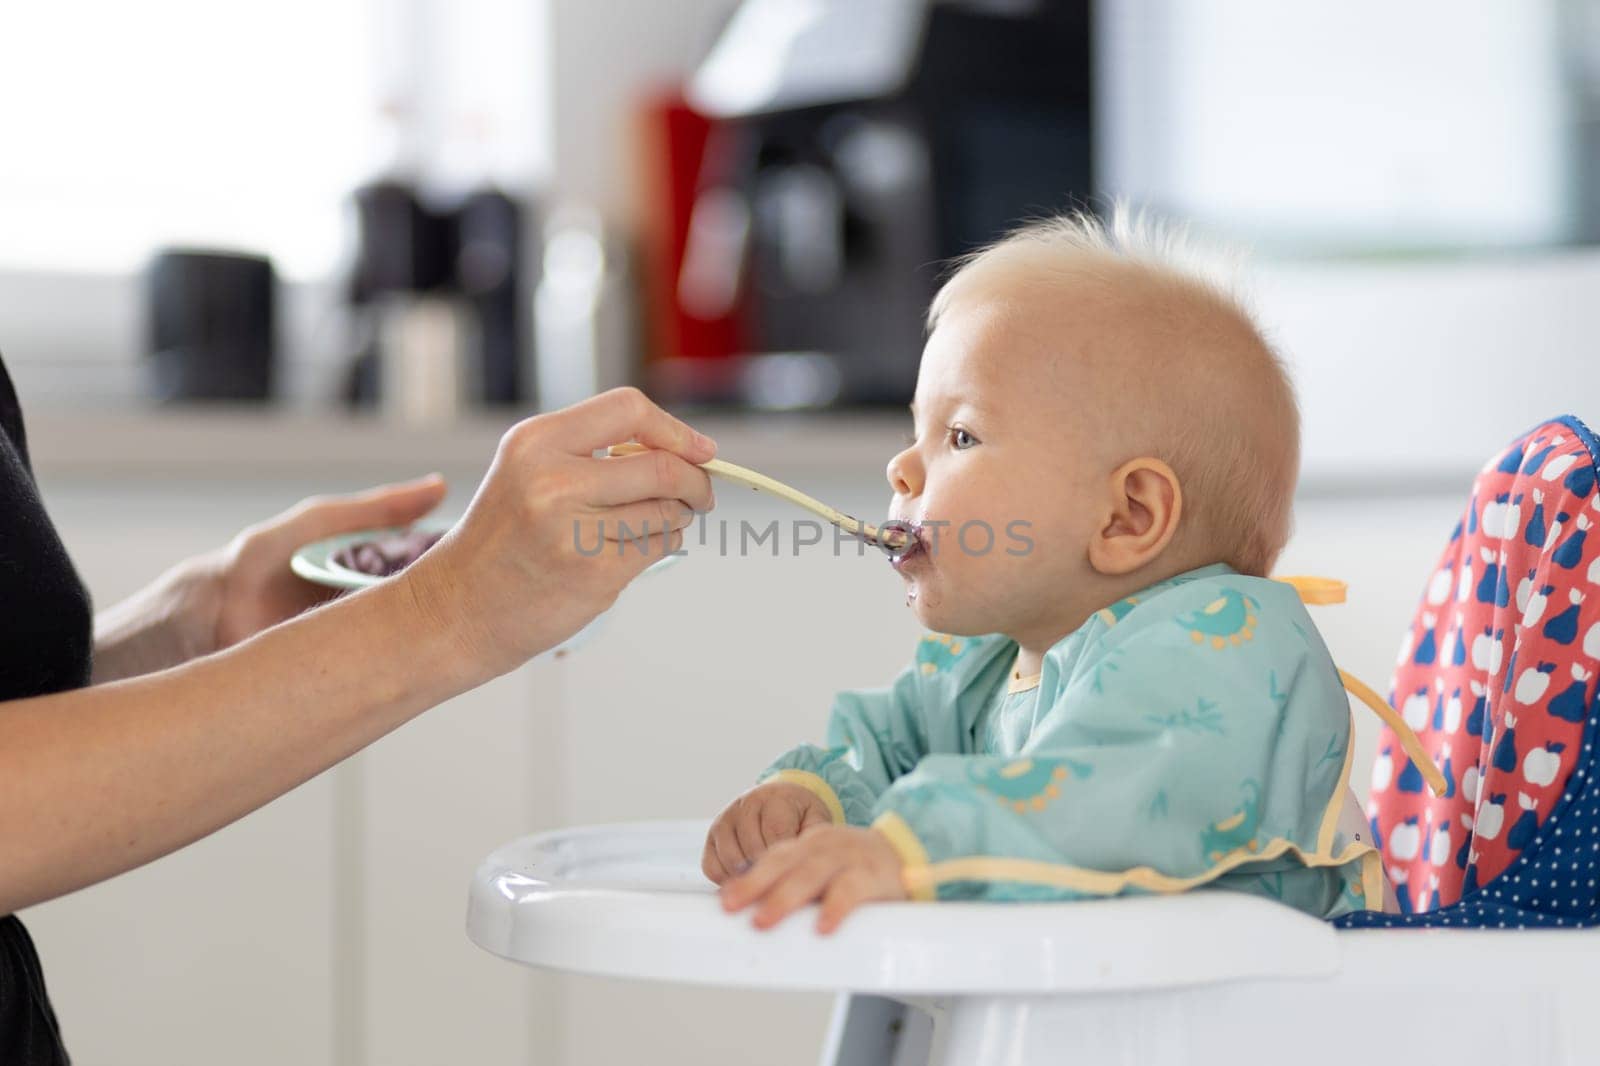 Mother spoon feeding her baby boy child in baby chair with fruit puree in kitchen at home. Baby solid food introduction concept